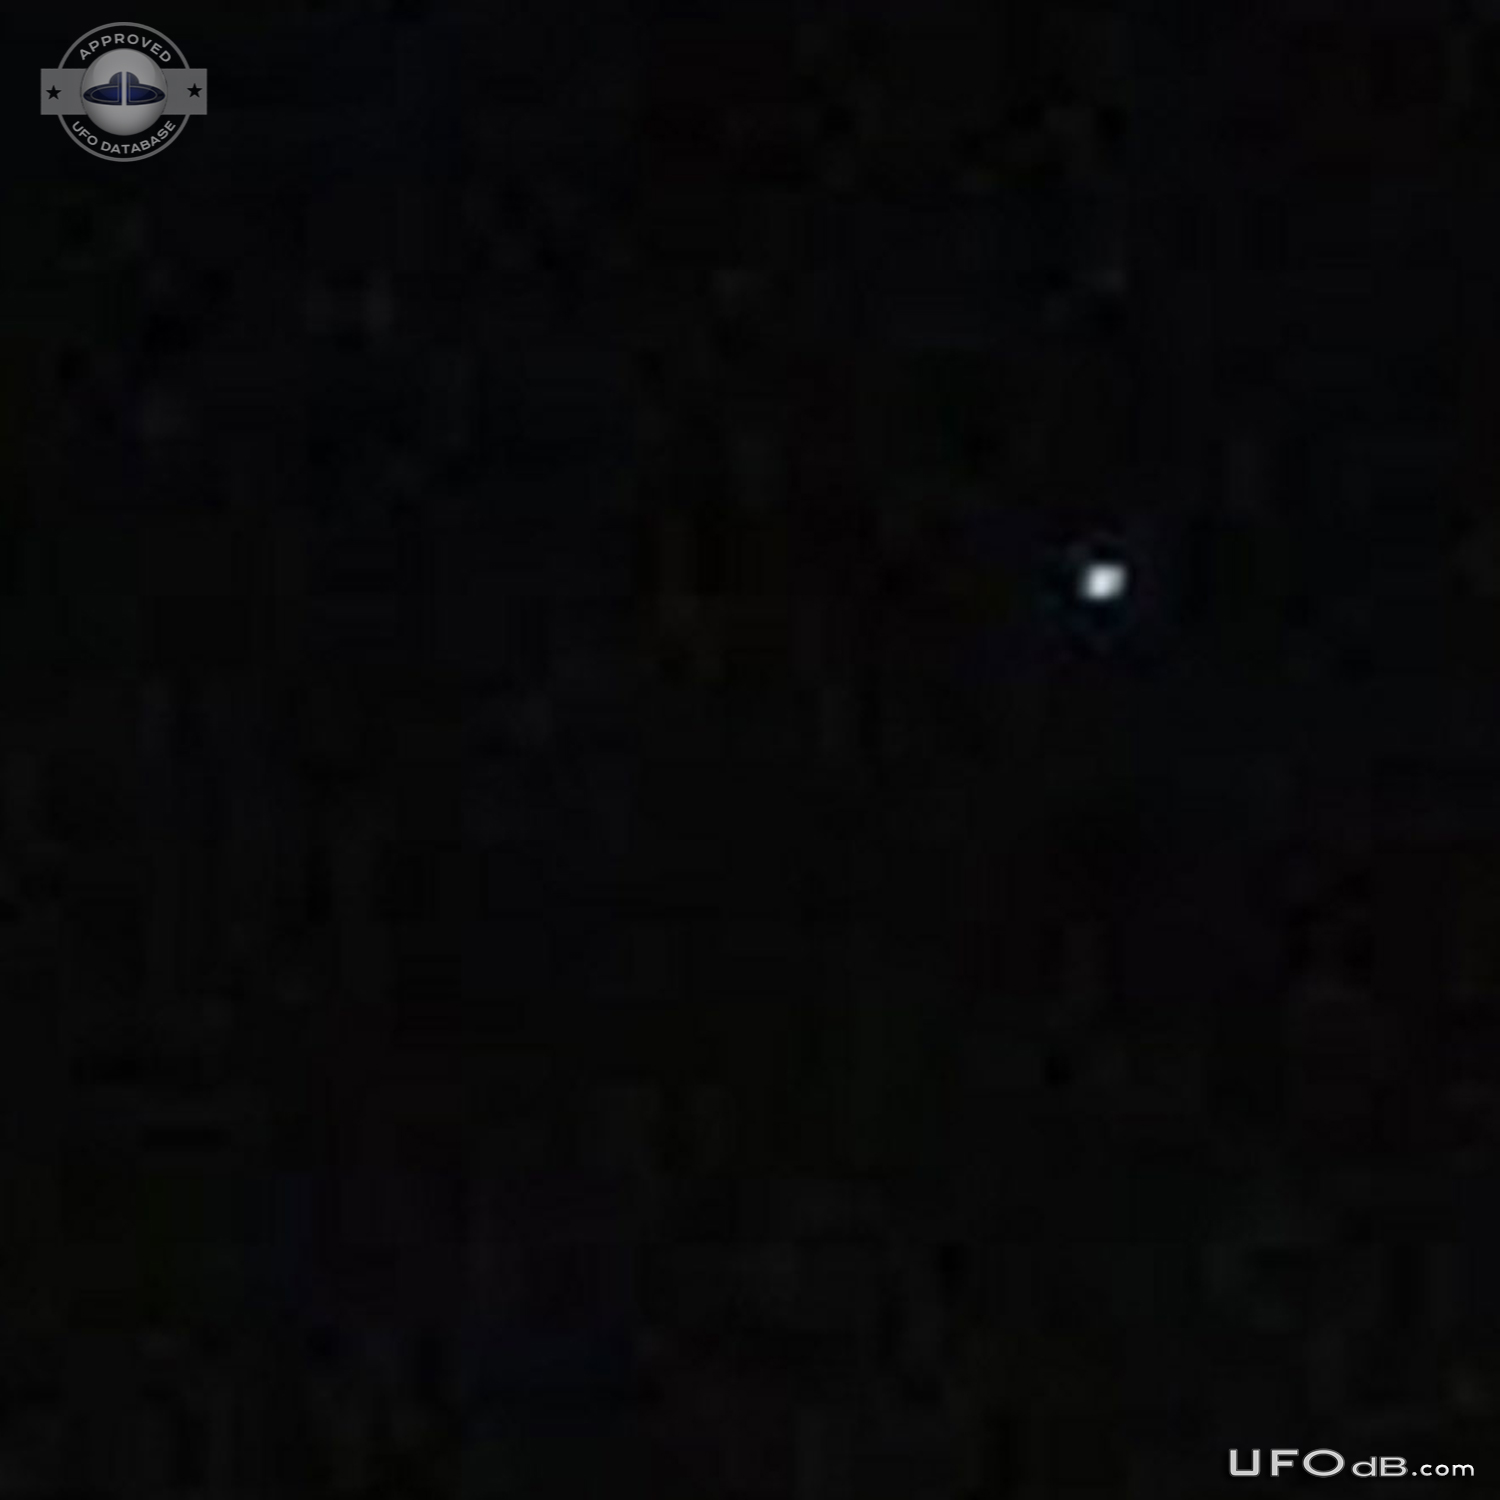 Unusual aerial UFO changed in colours over West Yorkshire UK 2015 UFO Picture #629-2